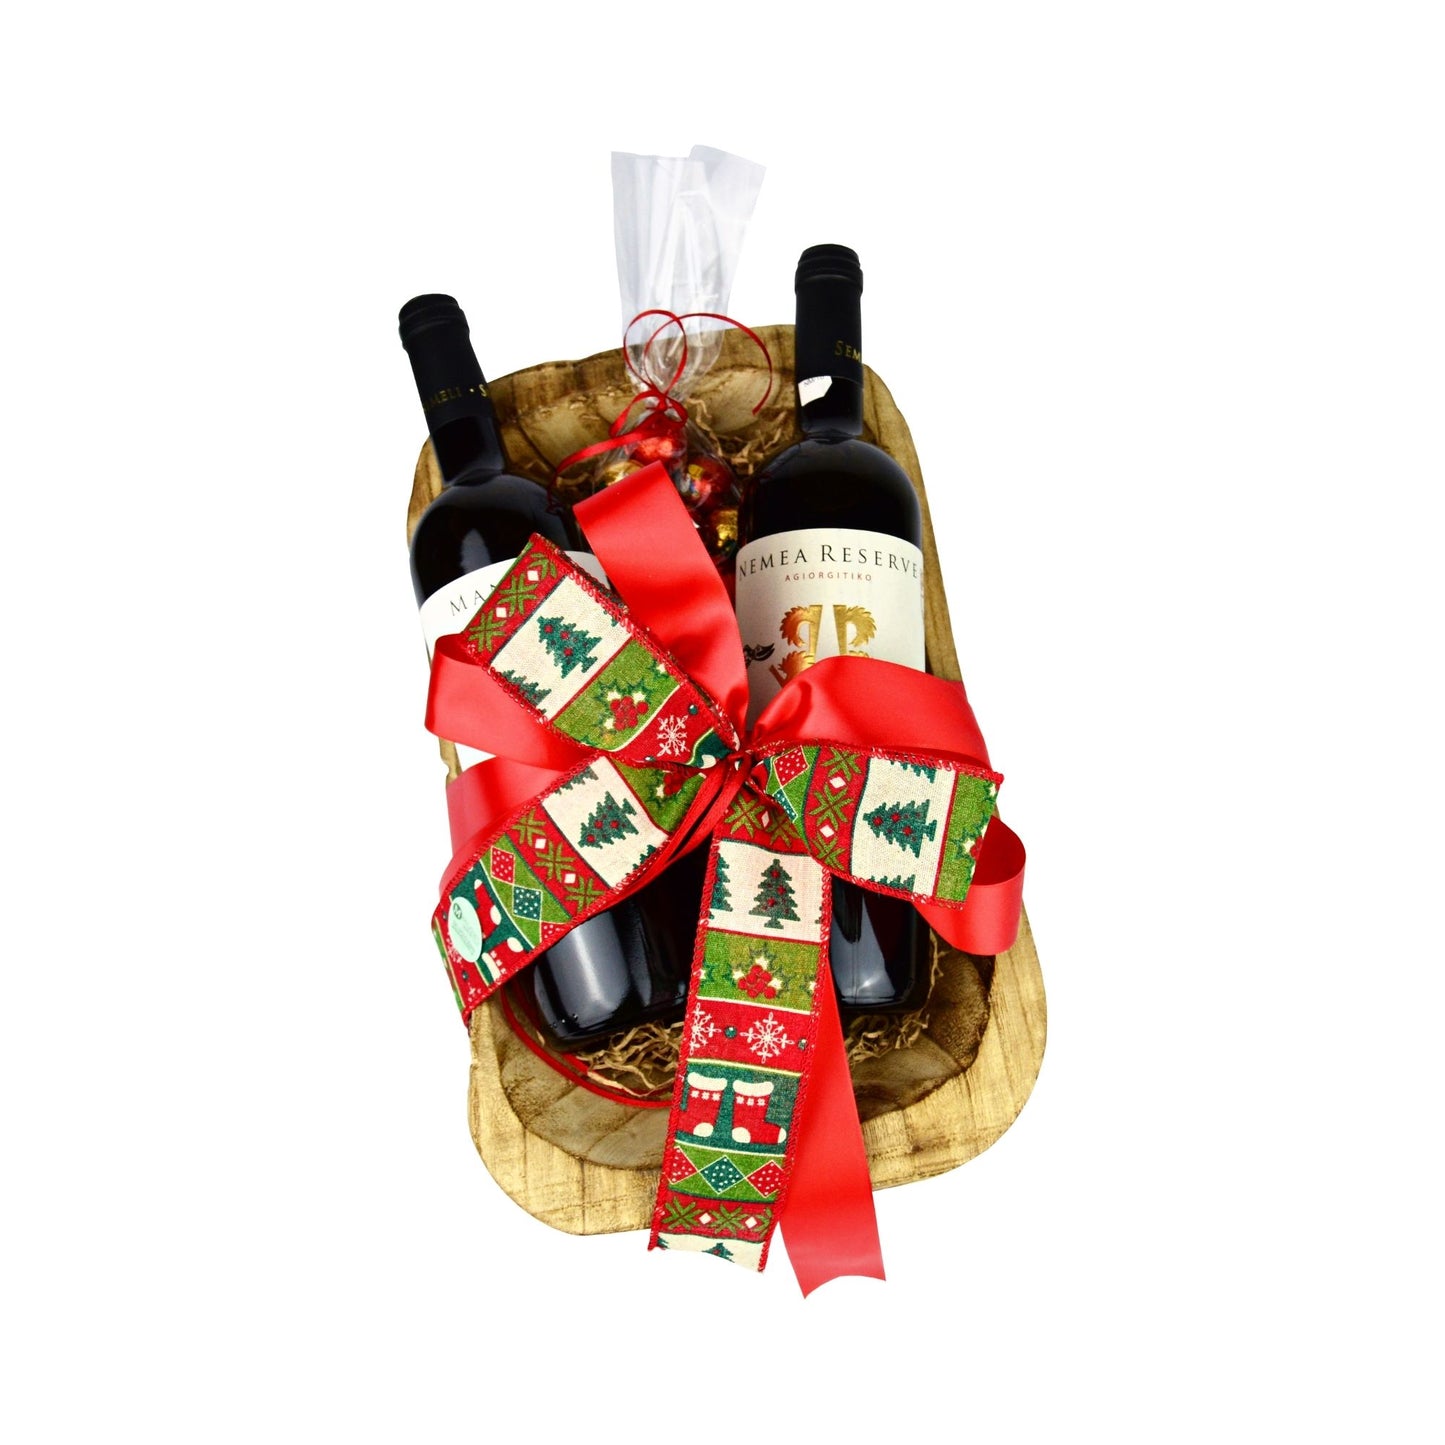 WOODEN PLATE WITH 2 SEMELI WINES &amp; CHRISTMAS CHOCOLATES